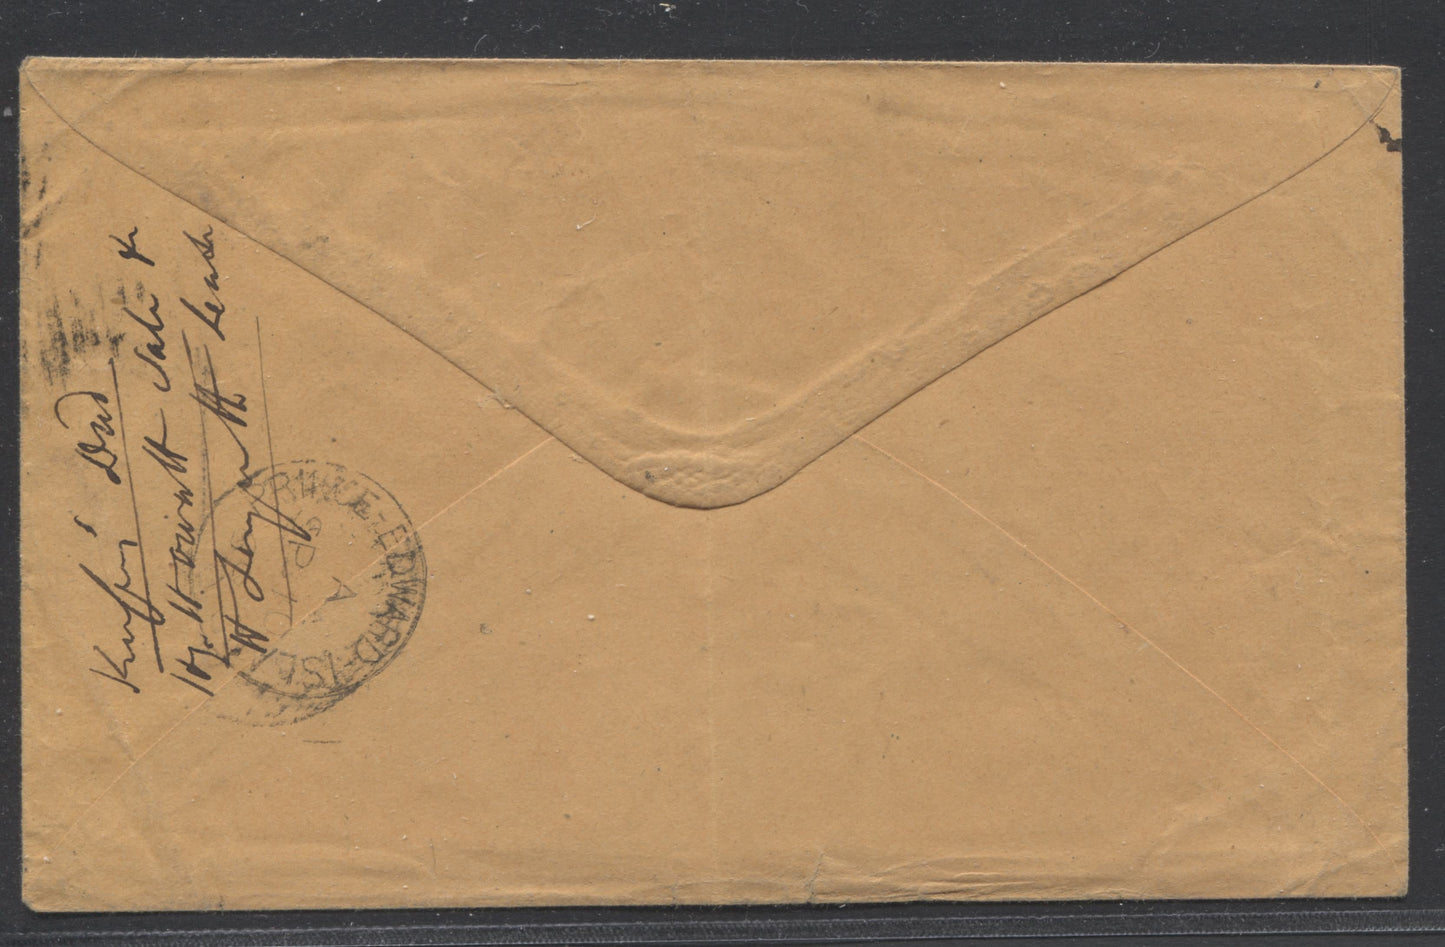 Lot 45 Prince Edward Island #5 2d Rose Perf. 11.5 x 11.75 Die 1 Single Usage on September 10, 1869 Cover to John Longworth, Esq., in Charlottetown